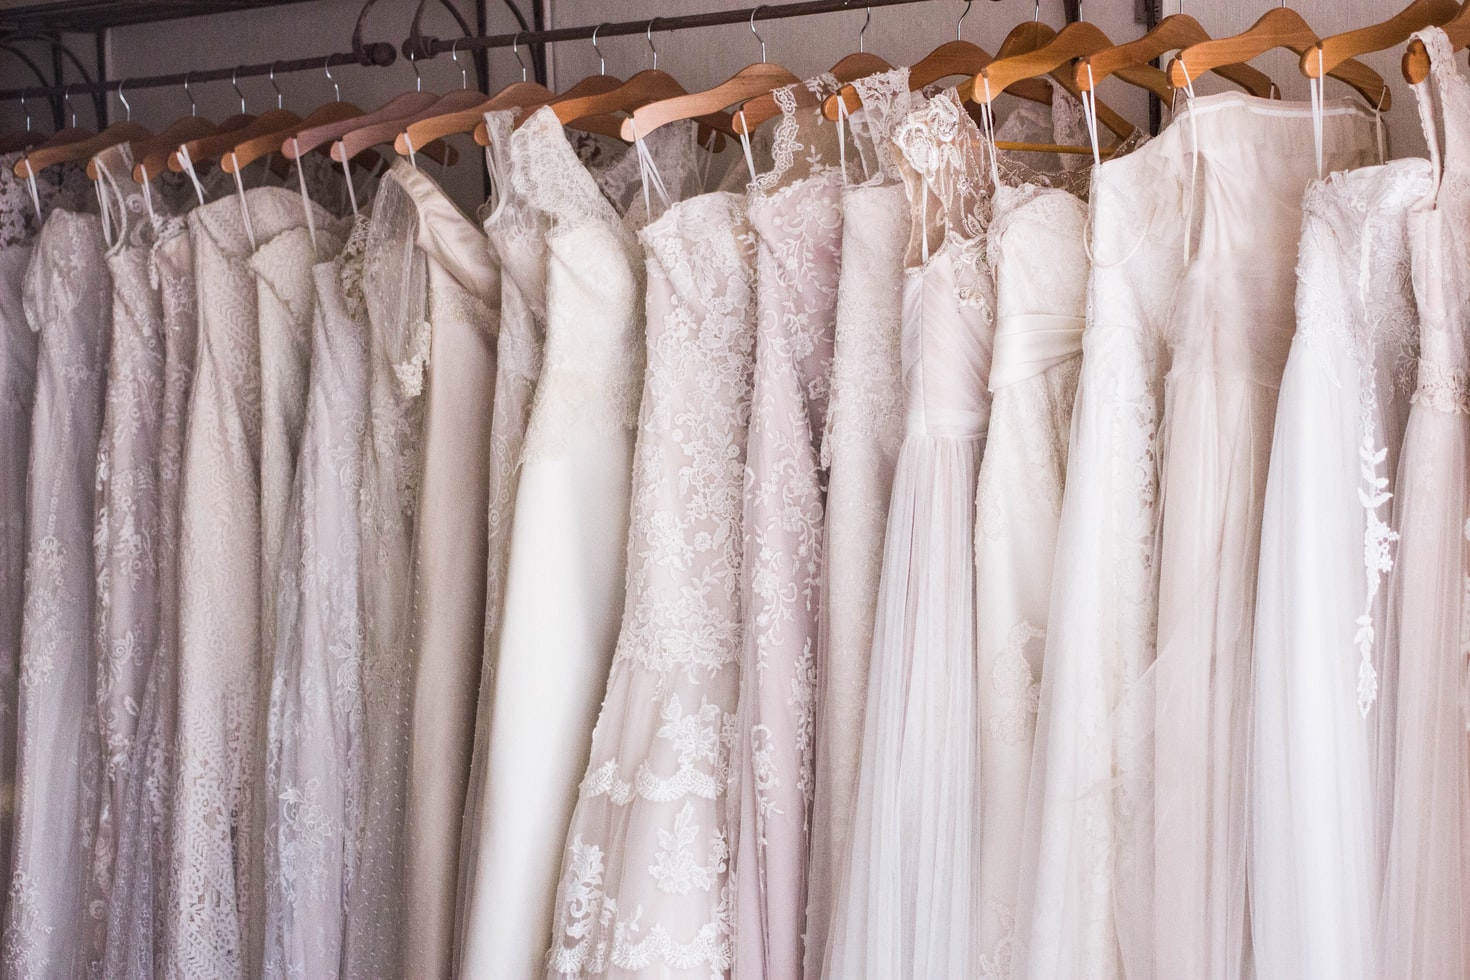 Say Yes To The Perfect Wedding Dress By Keeping These Things In Mind